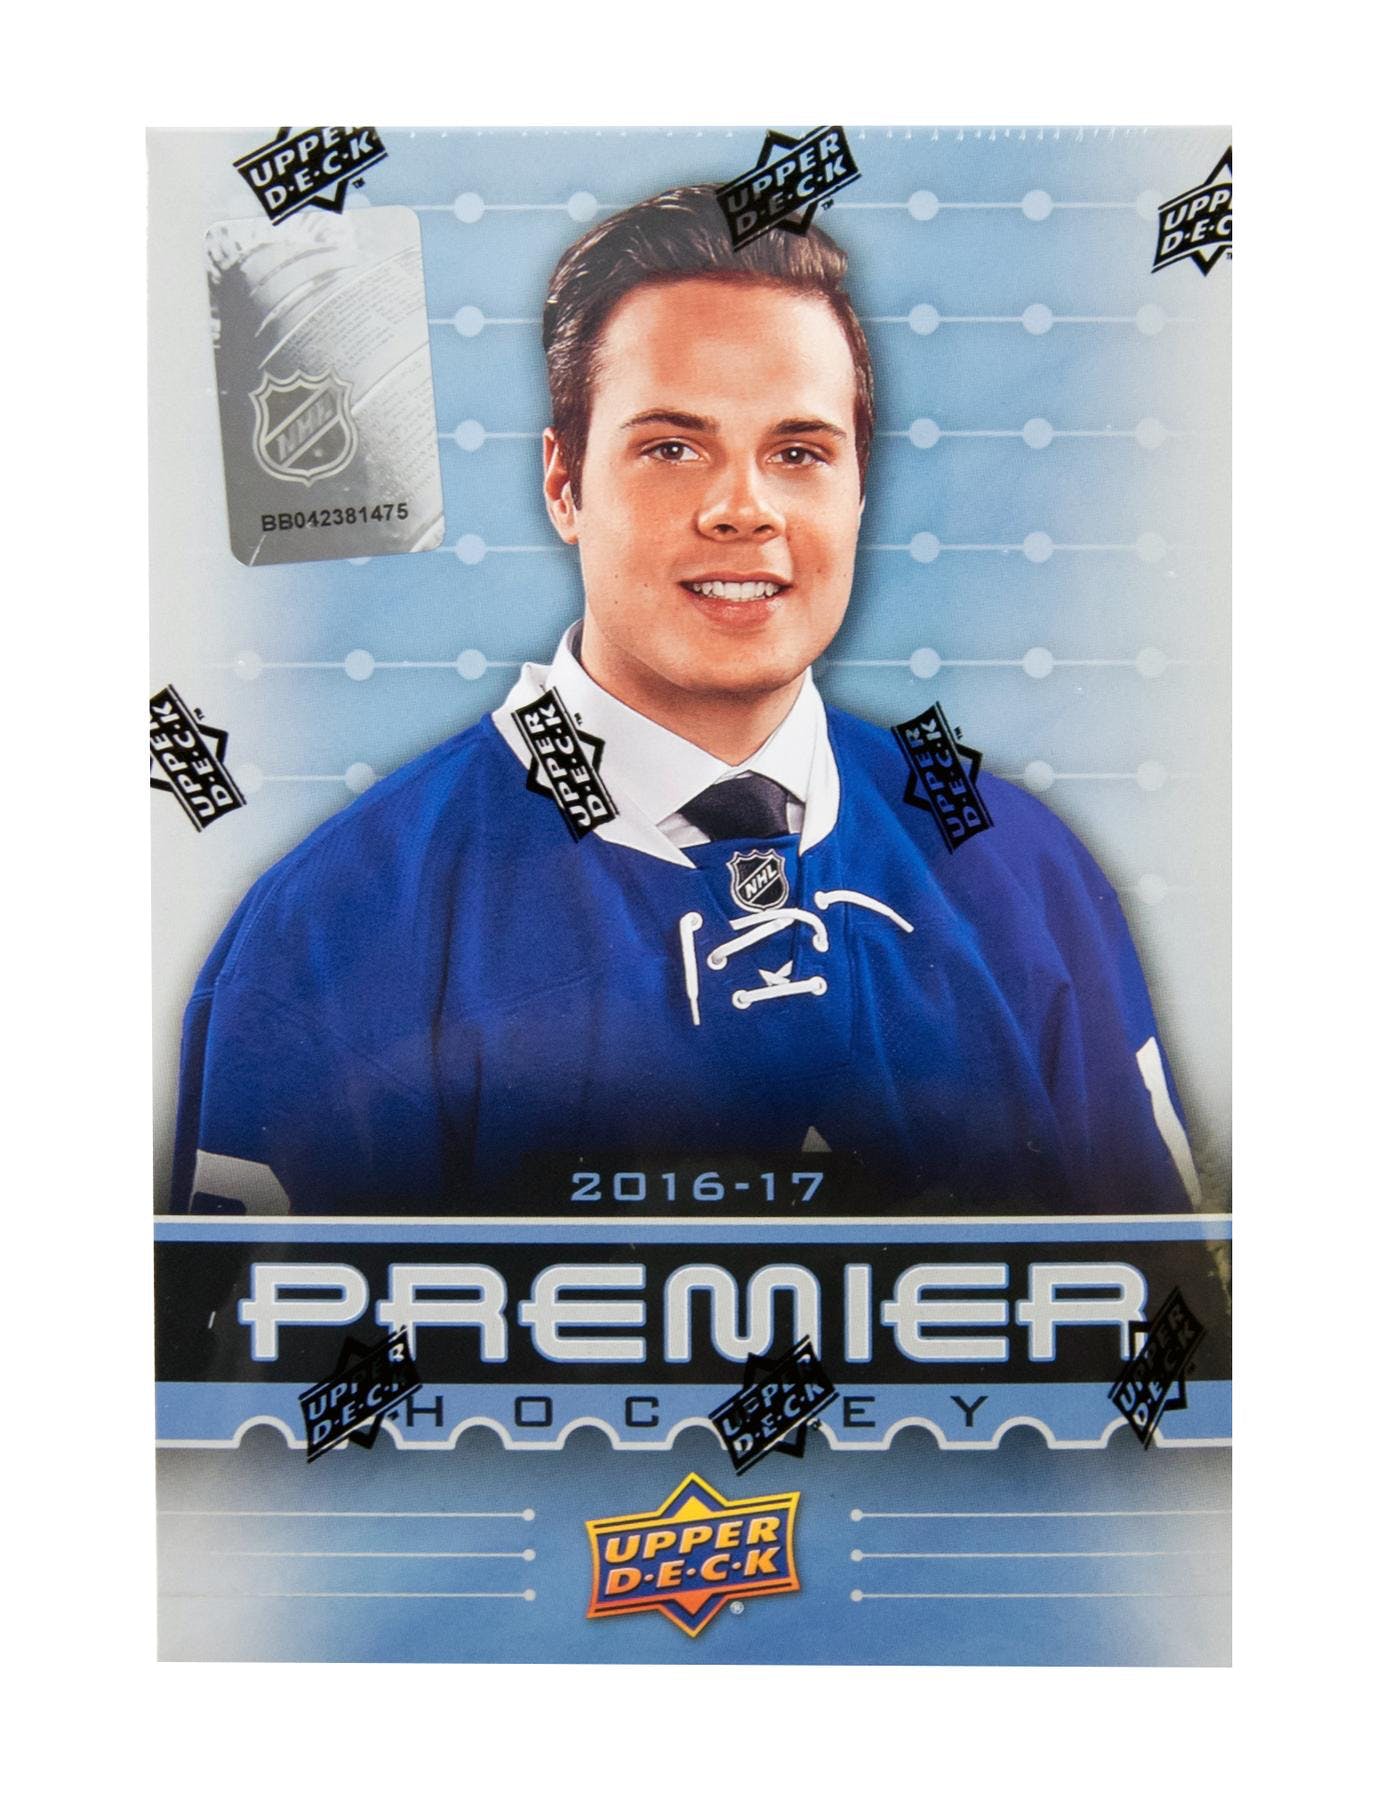 2016-17 Upper Deck Premier Hockey Hobby Case (Boxes of 5) - BigBoi Cards